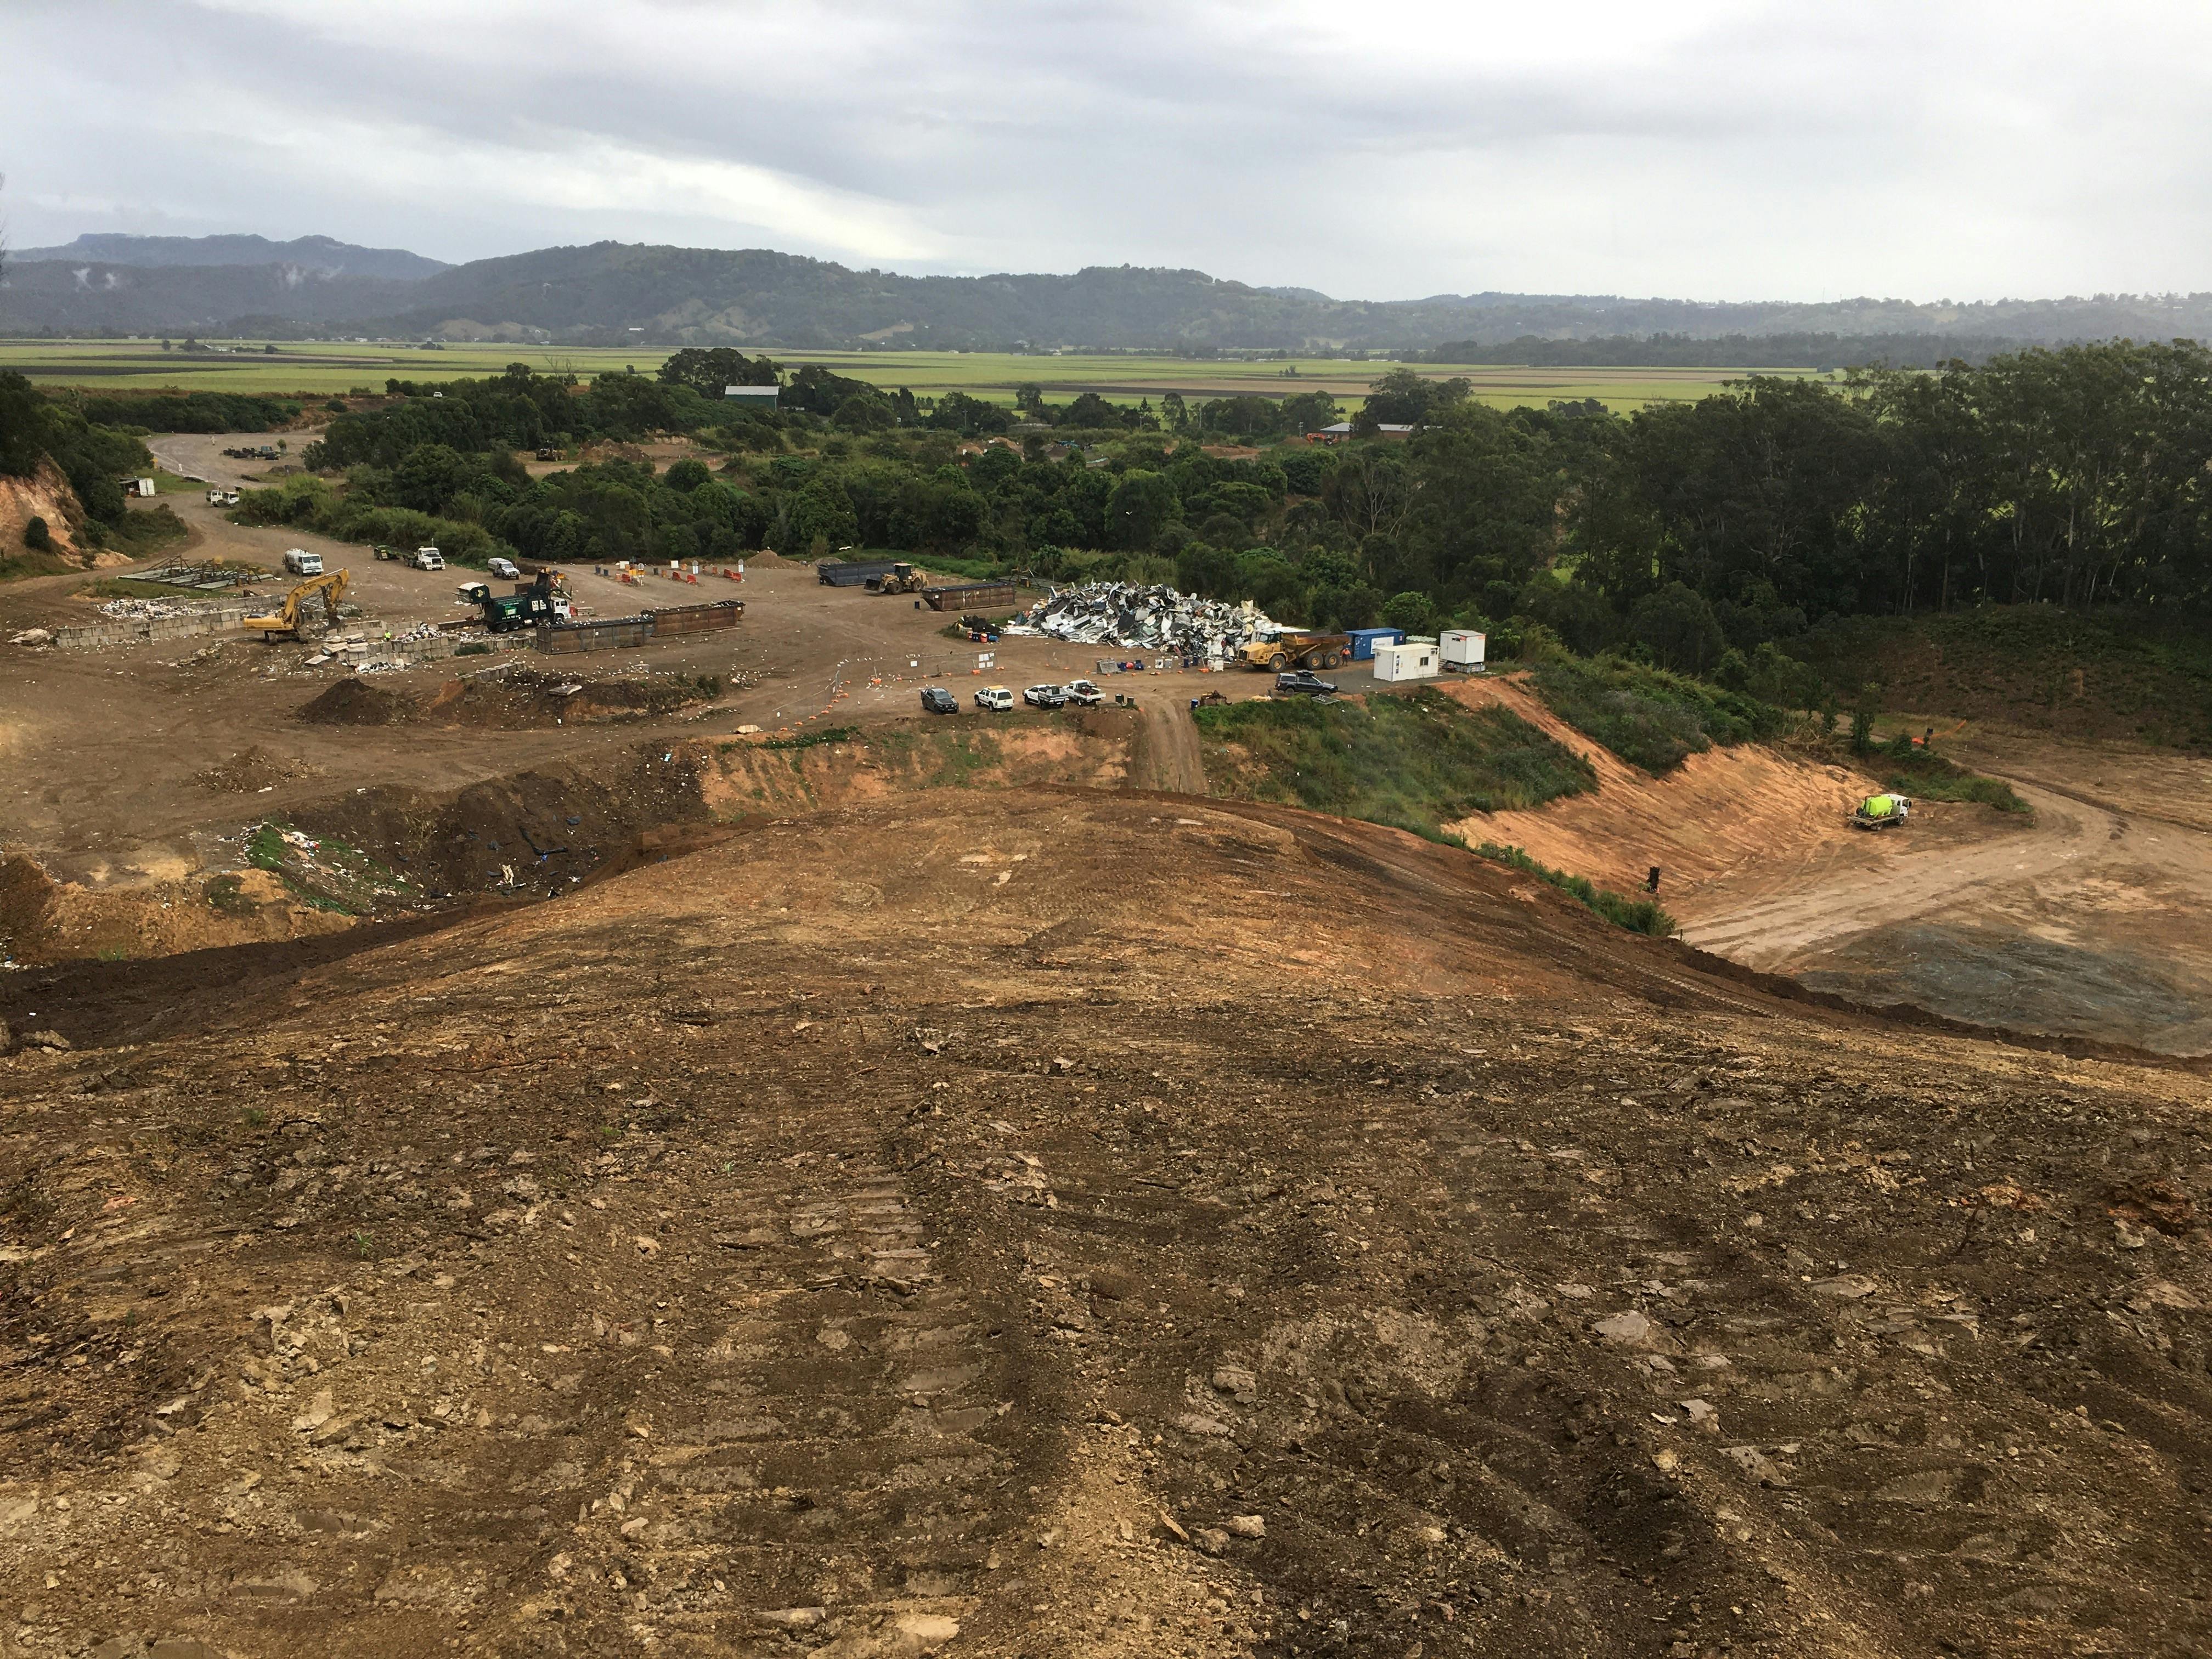 Top of Landfill Construction Site - 24 August 2021